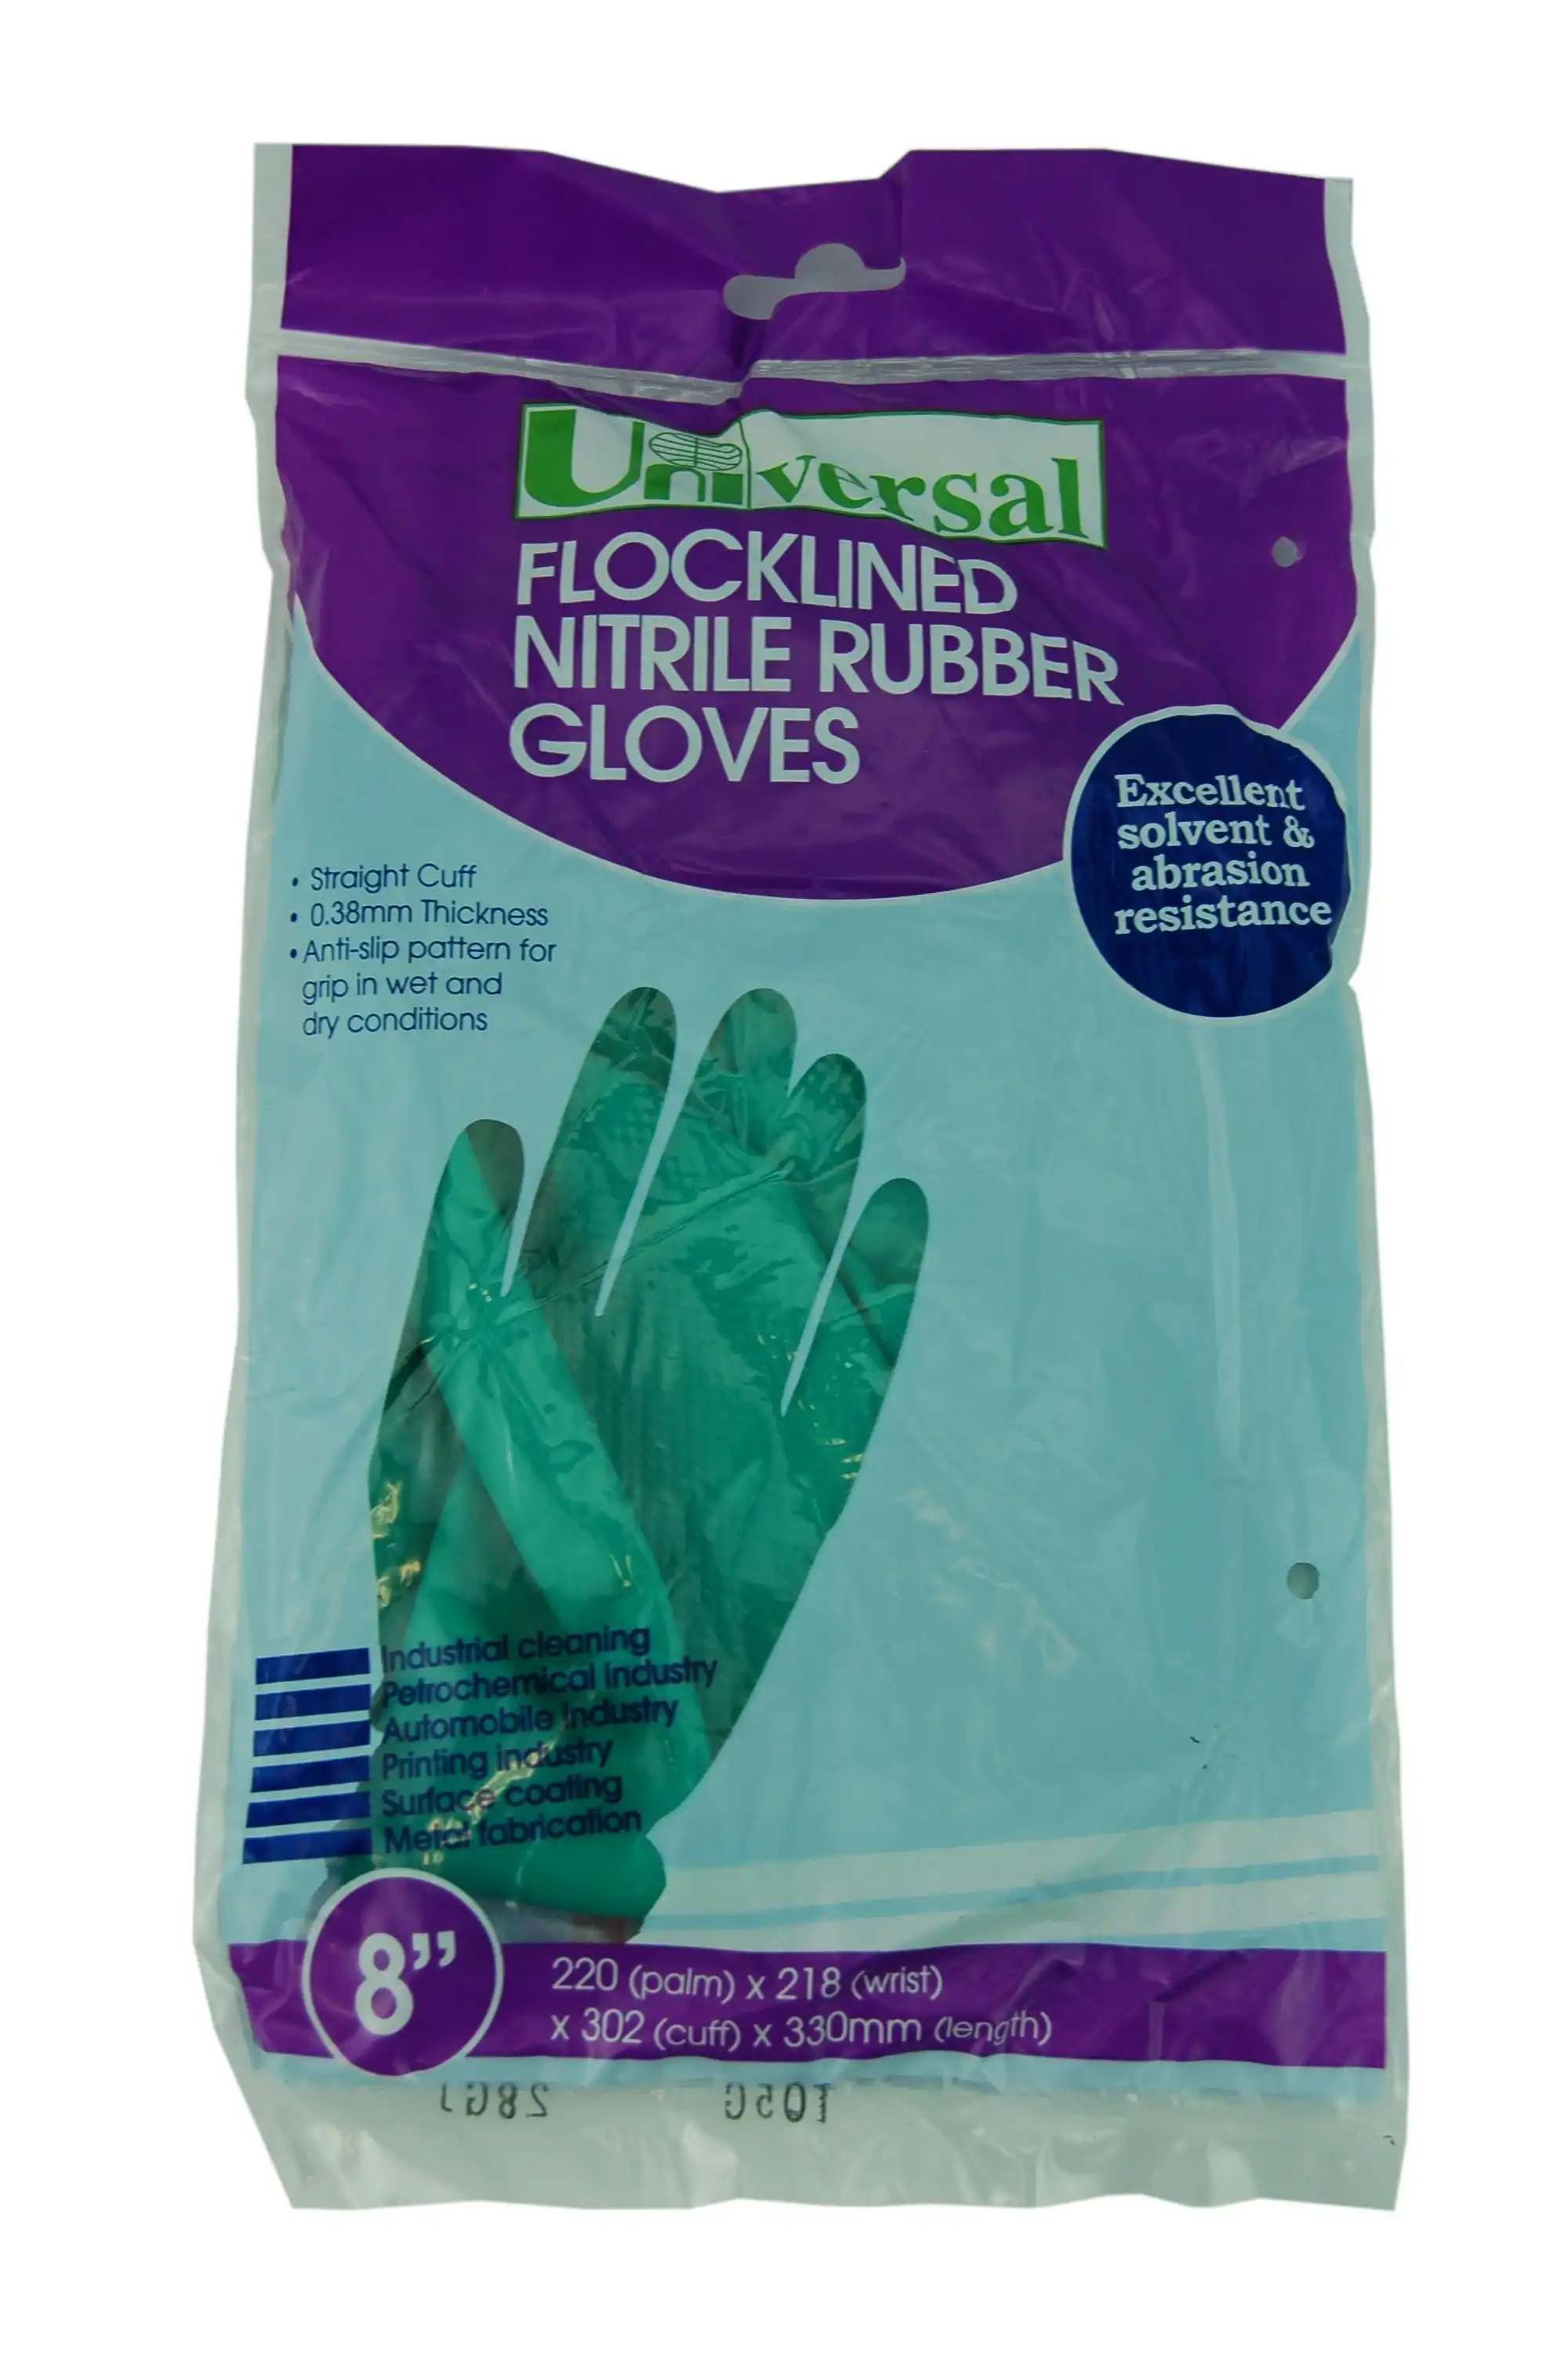 Universal Flocklined Nitrile Gloves, Heavy Duty, EN374, Size 8, 33cm Long, 0.38mm Thick, Green Colour, 1 Pair/Bag, Replaces Solvex x79